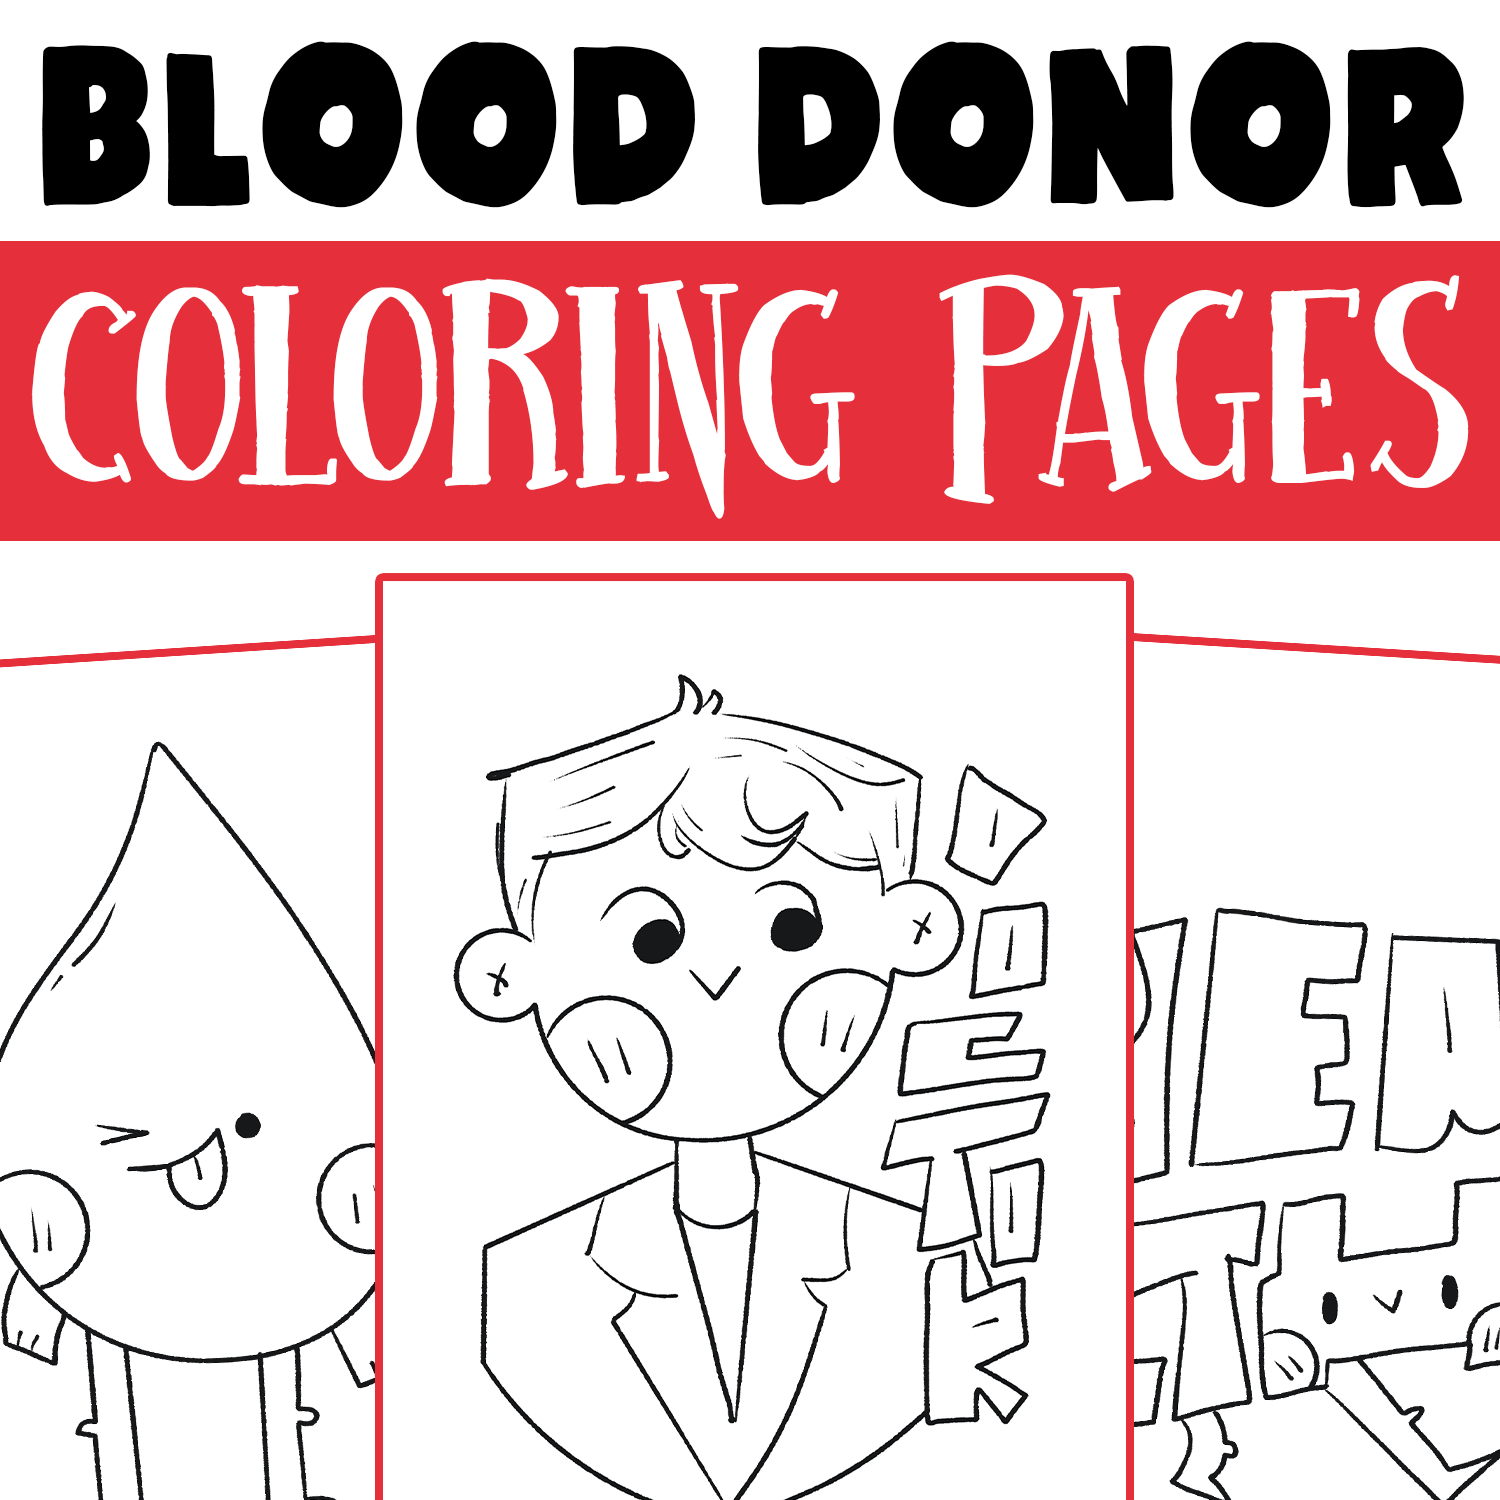 Blood donor awareness month coloring pages blood donor coloring worksheets made by teachers